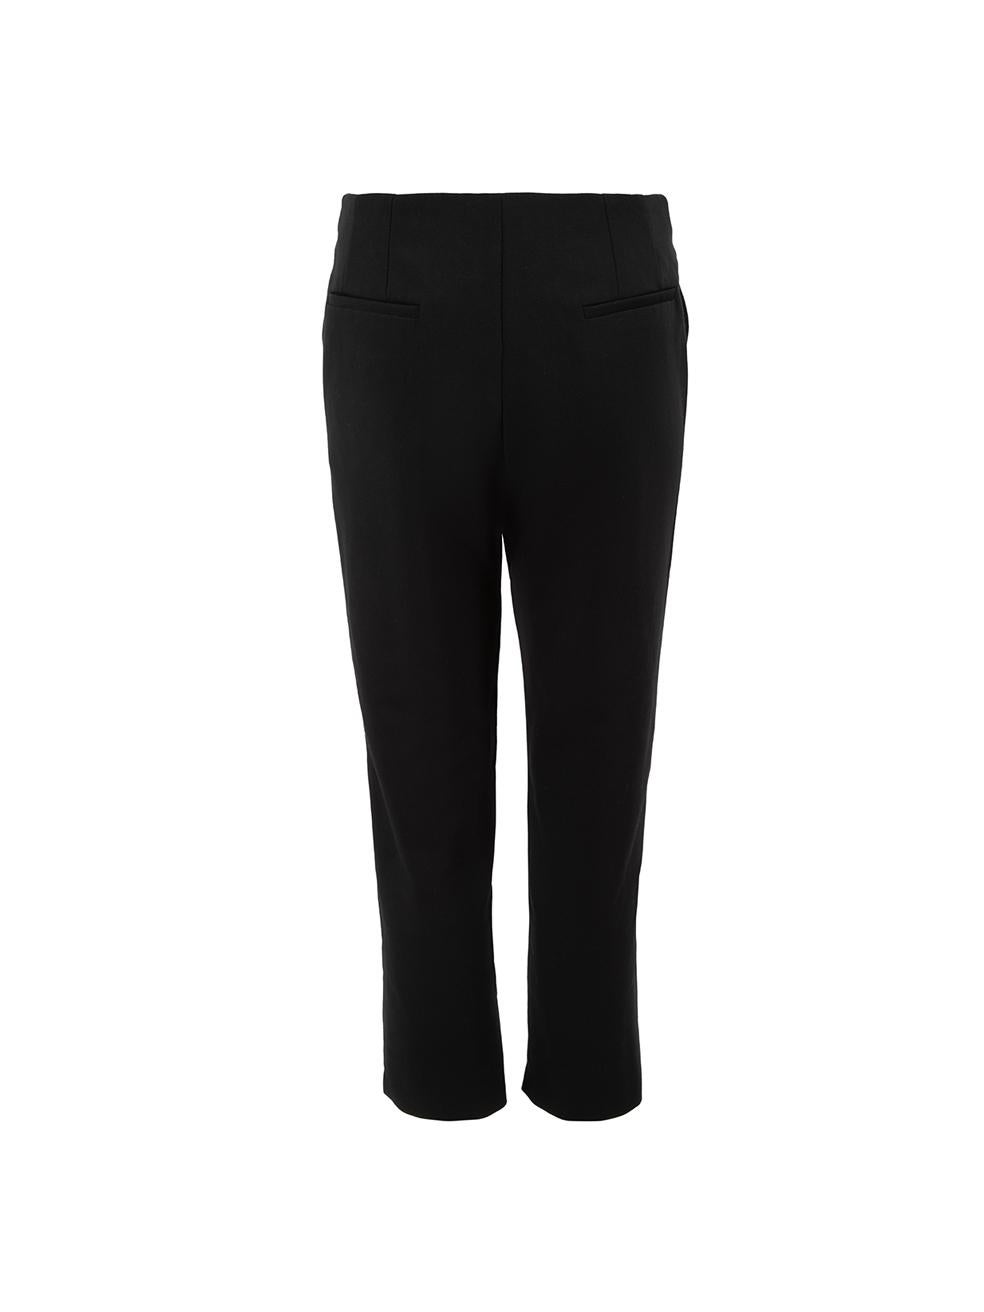 Maje Black Belted Step Hem Straight Leg Trousers Size M In Good Condition In London, GB